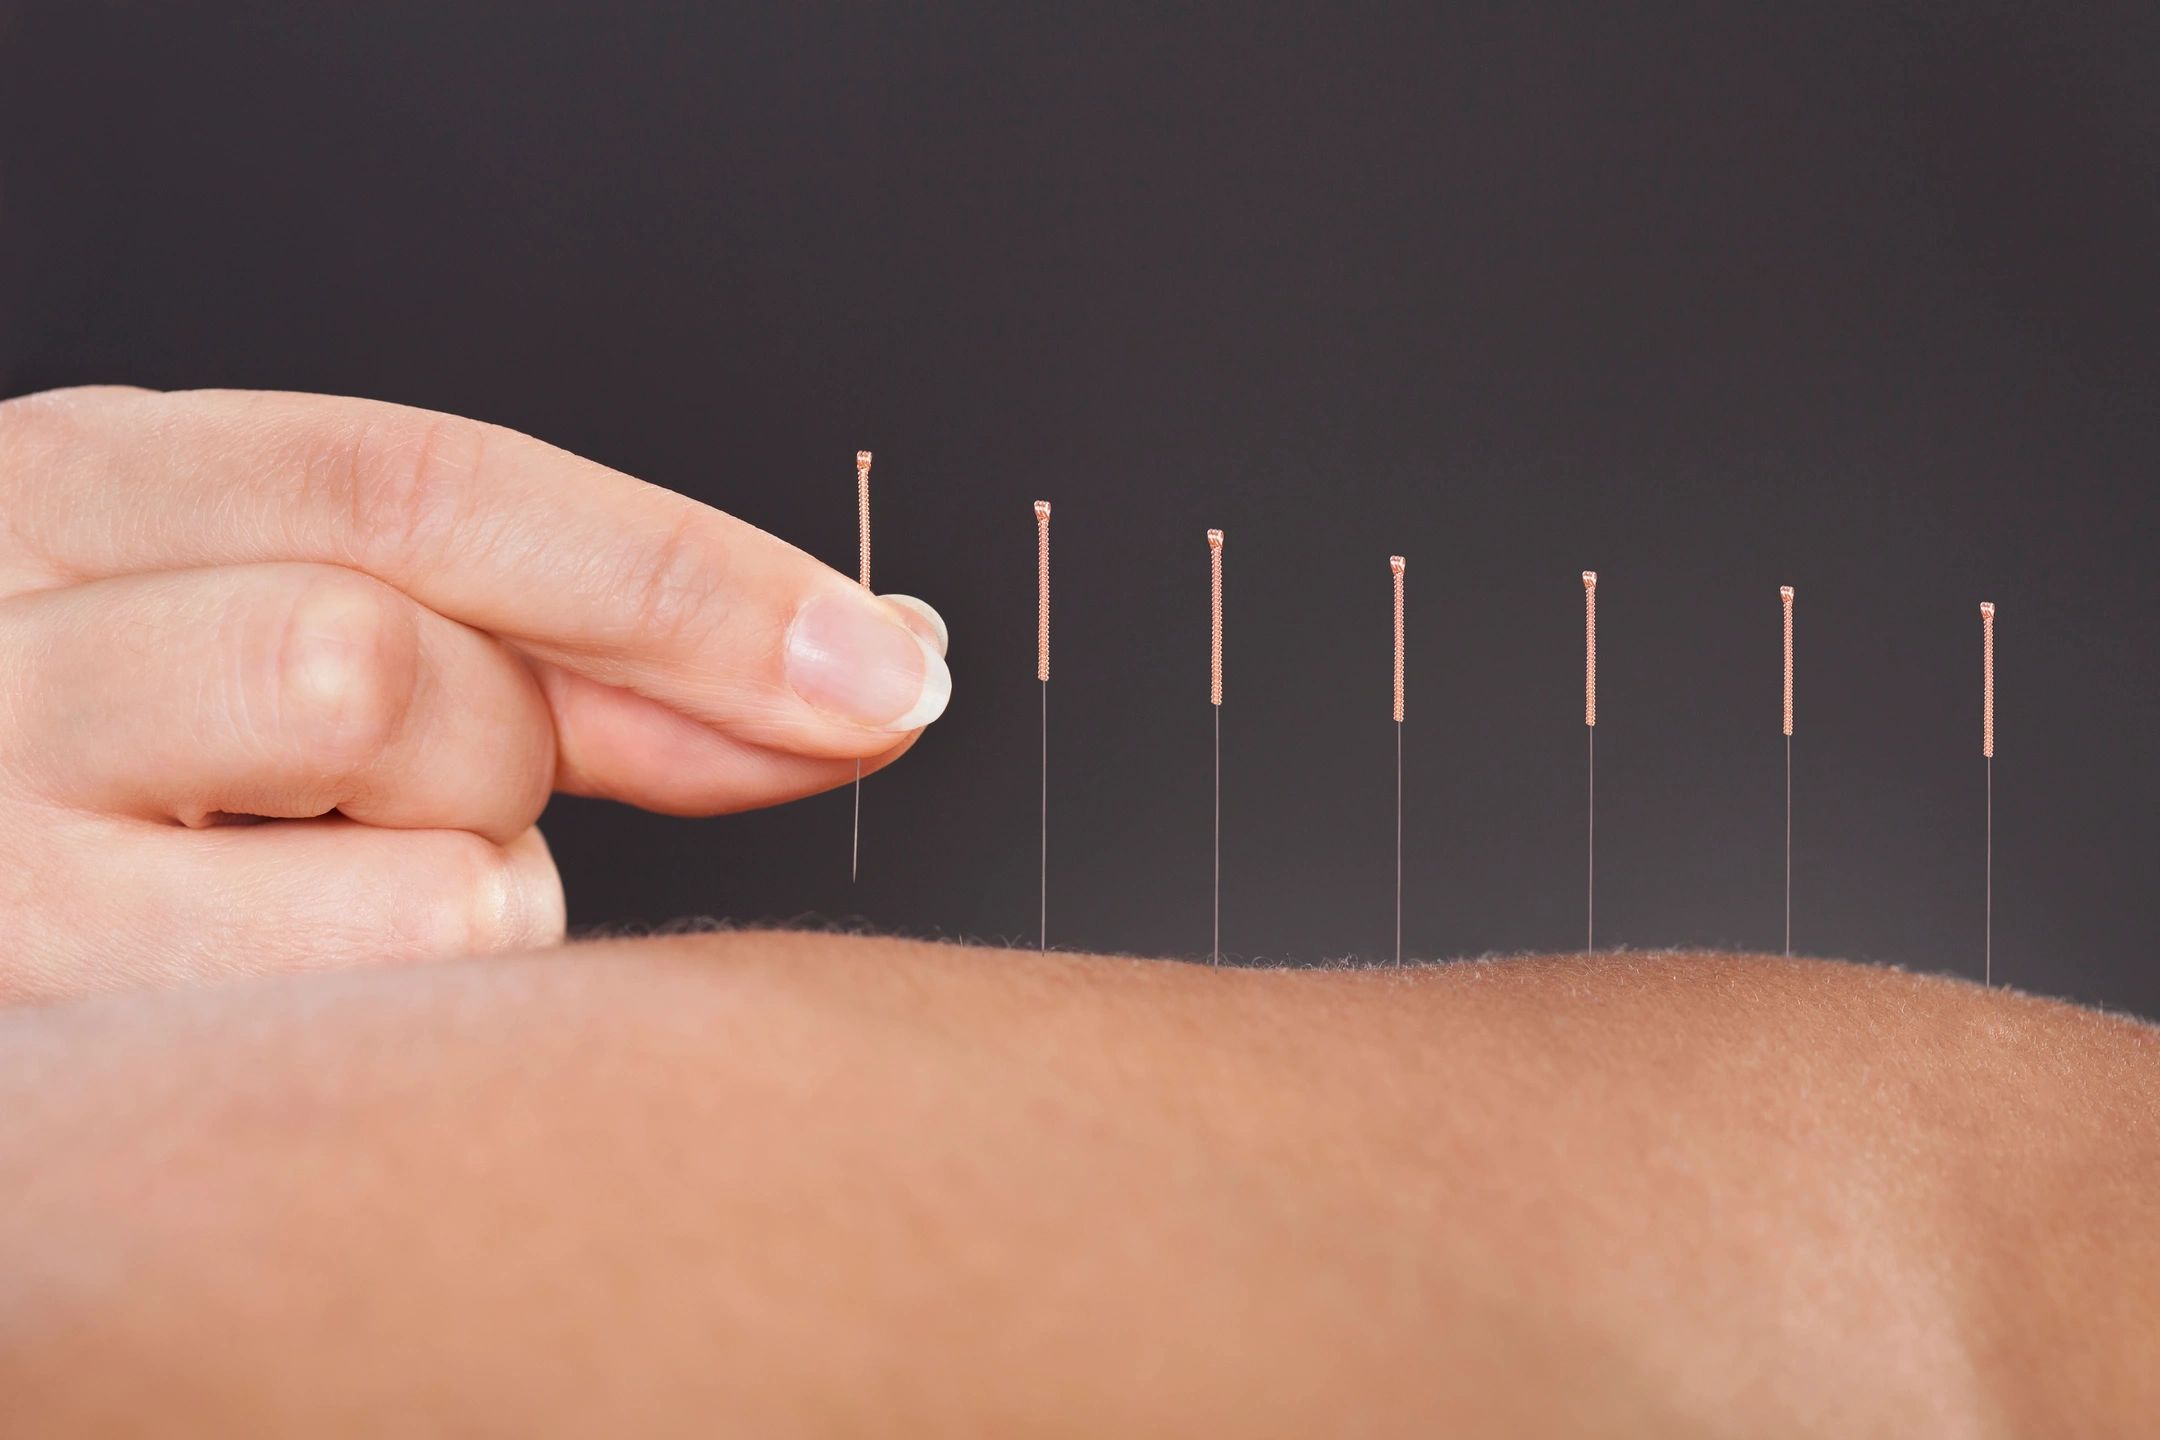 Acupuncture is a popular and effective treatment method that has been used for centuries.